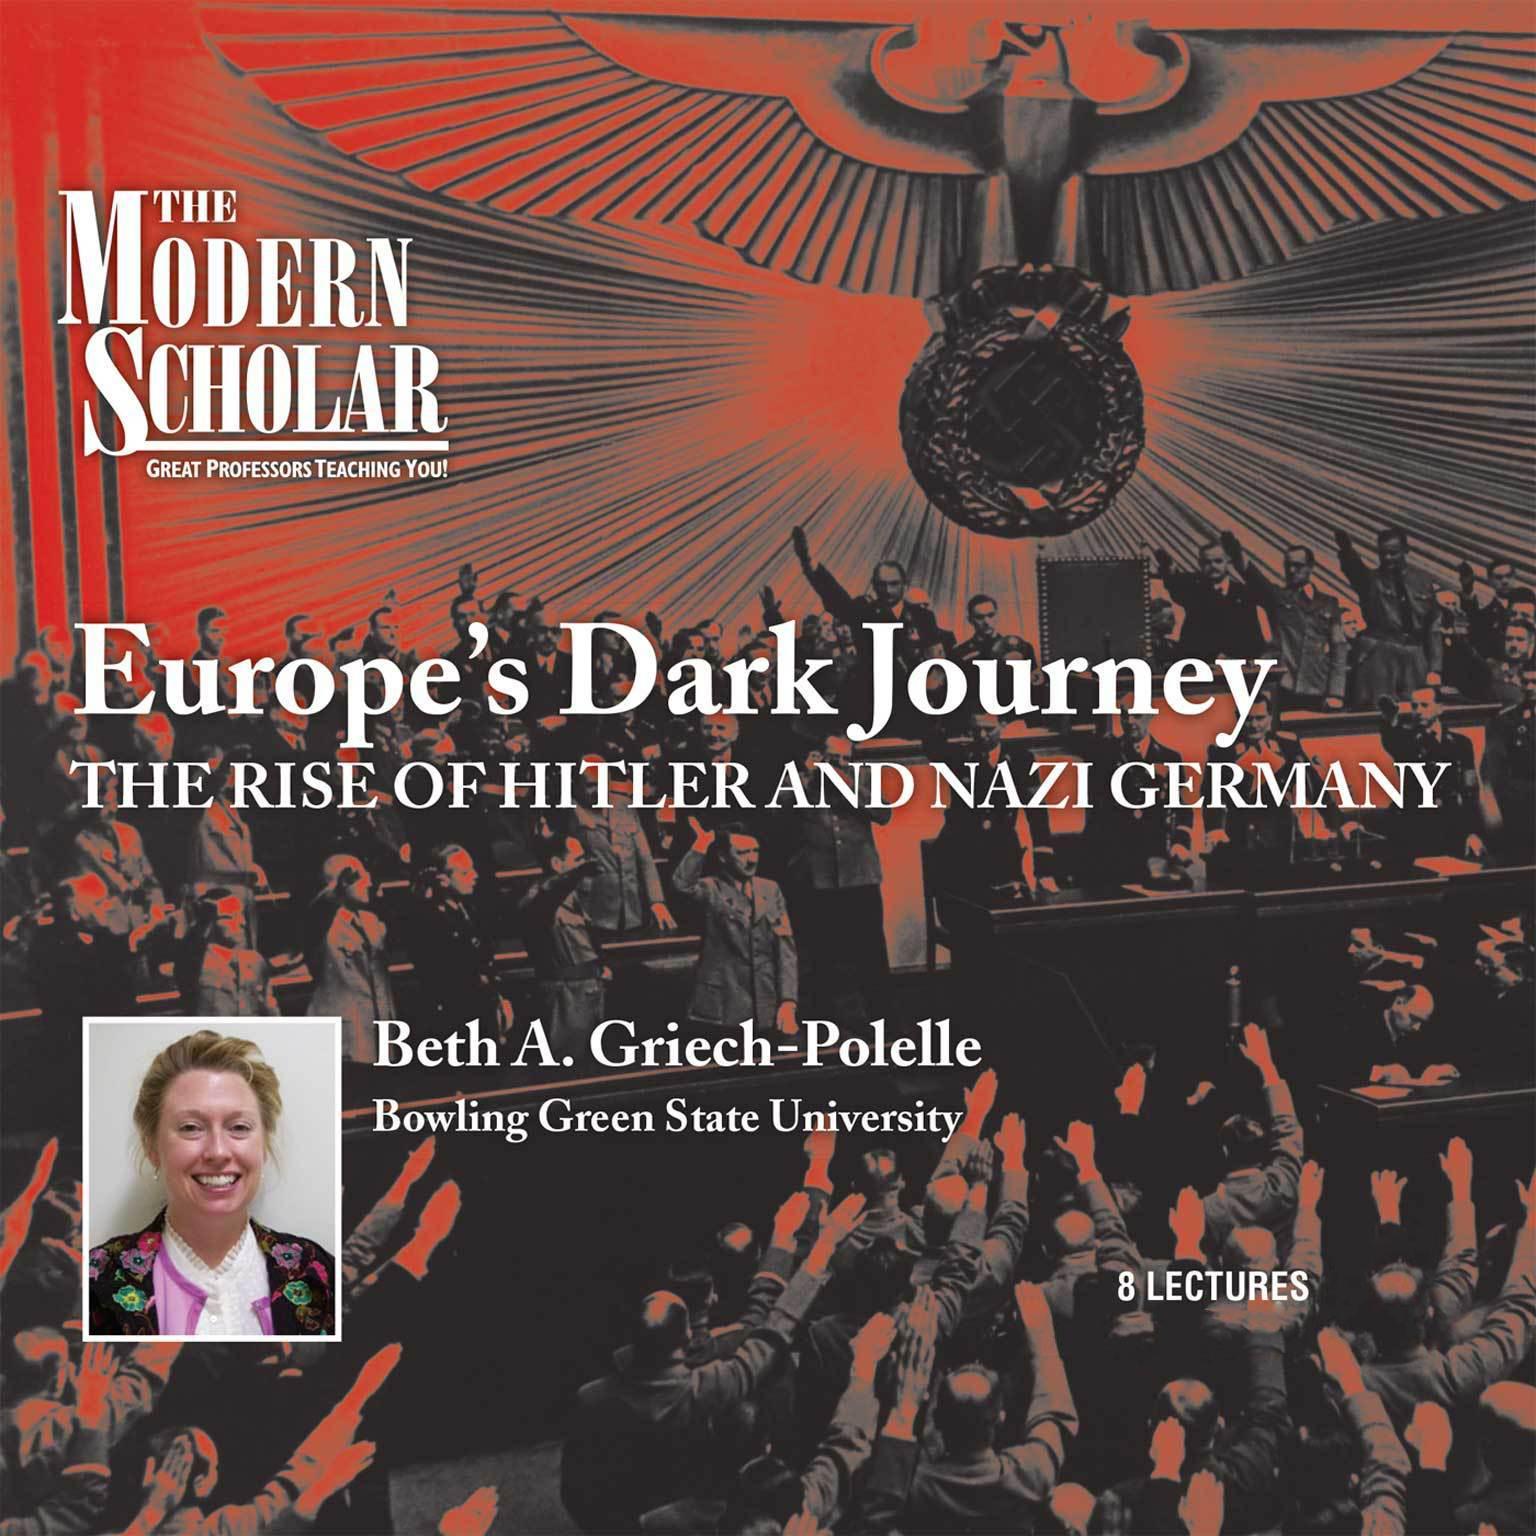 Europes Dark Journey: The Rise of Hitler and Nazi Germany Audiobook, by Beth A. Griech-Polelle